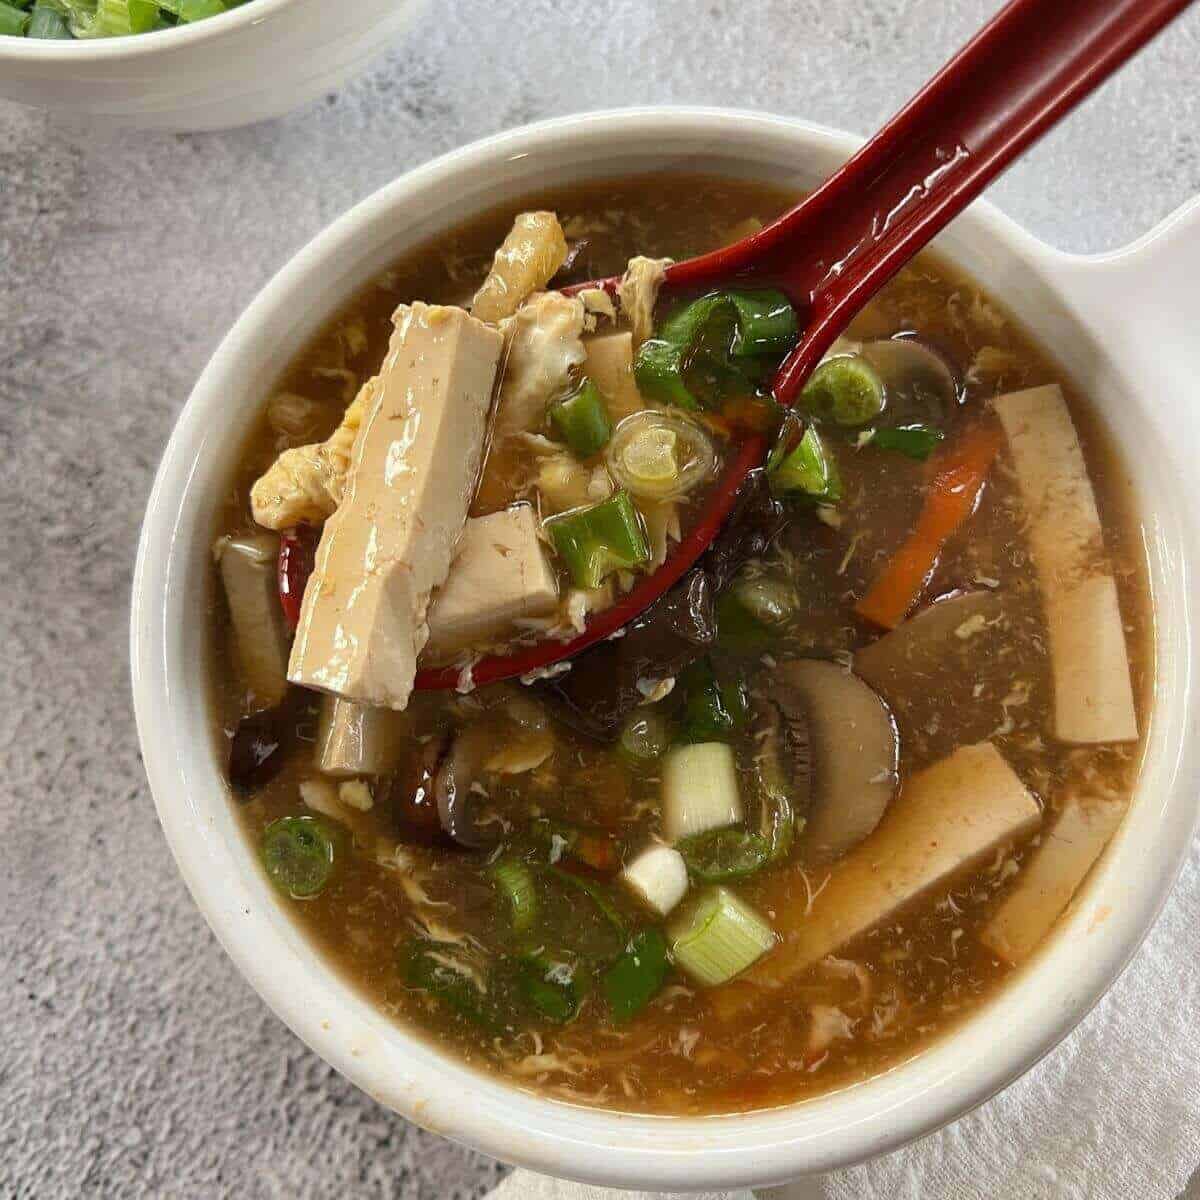 A spoonful of hot and sour soup